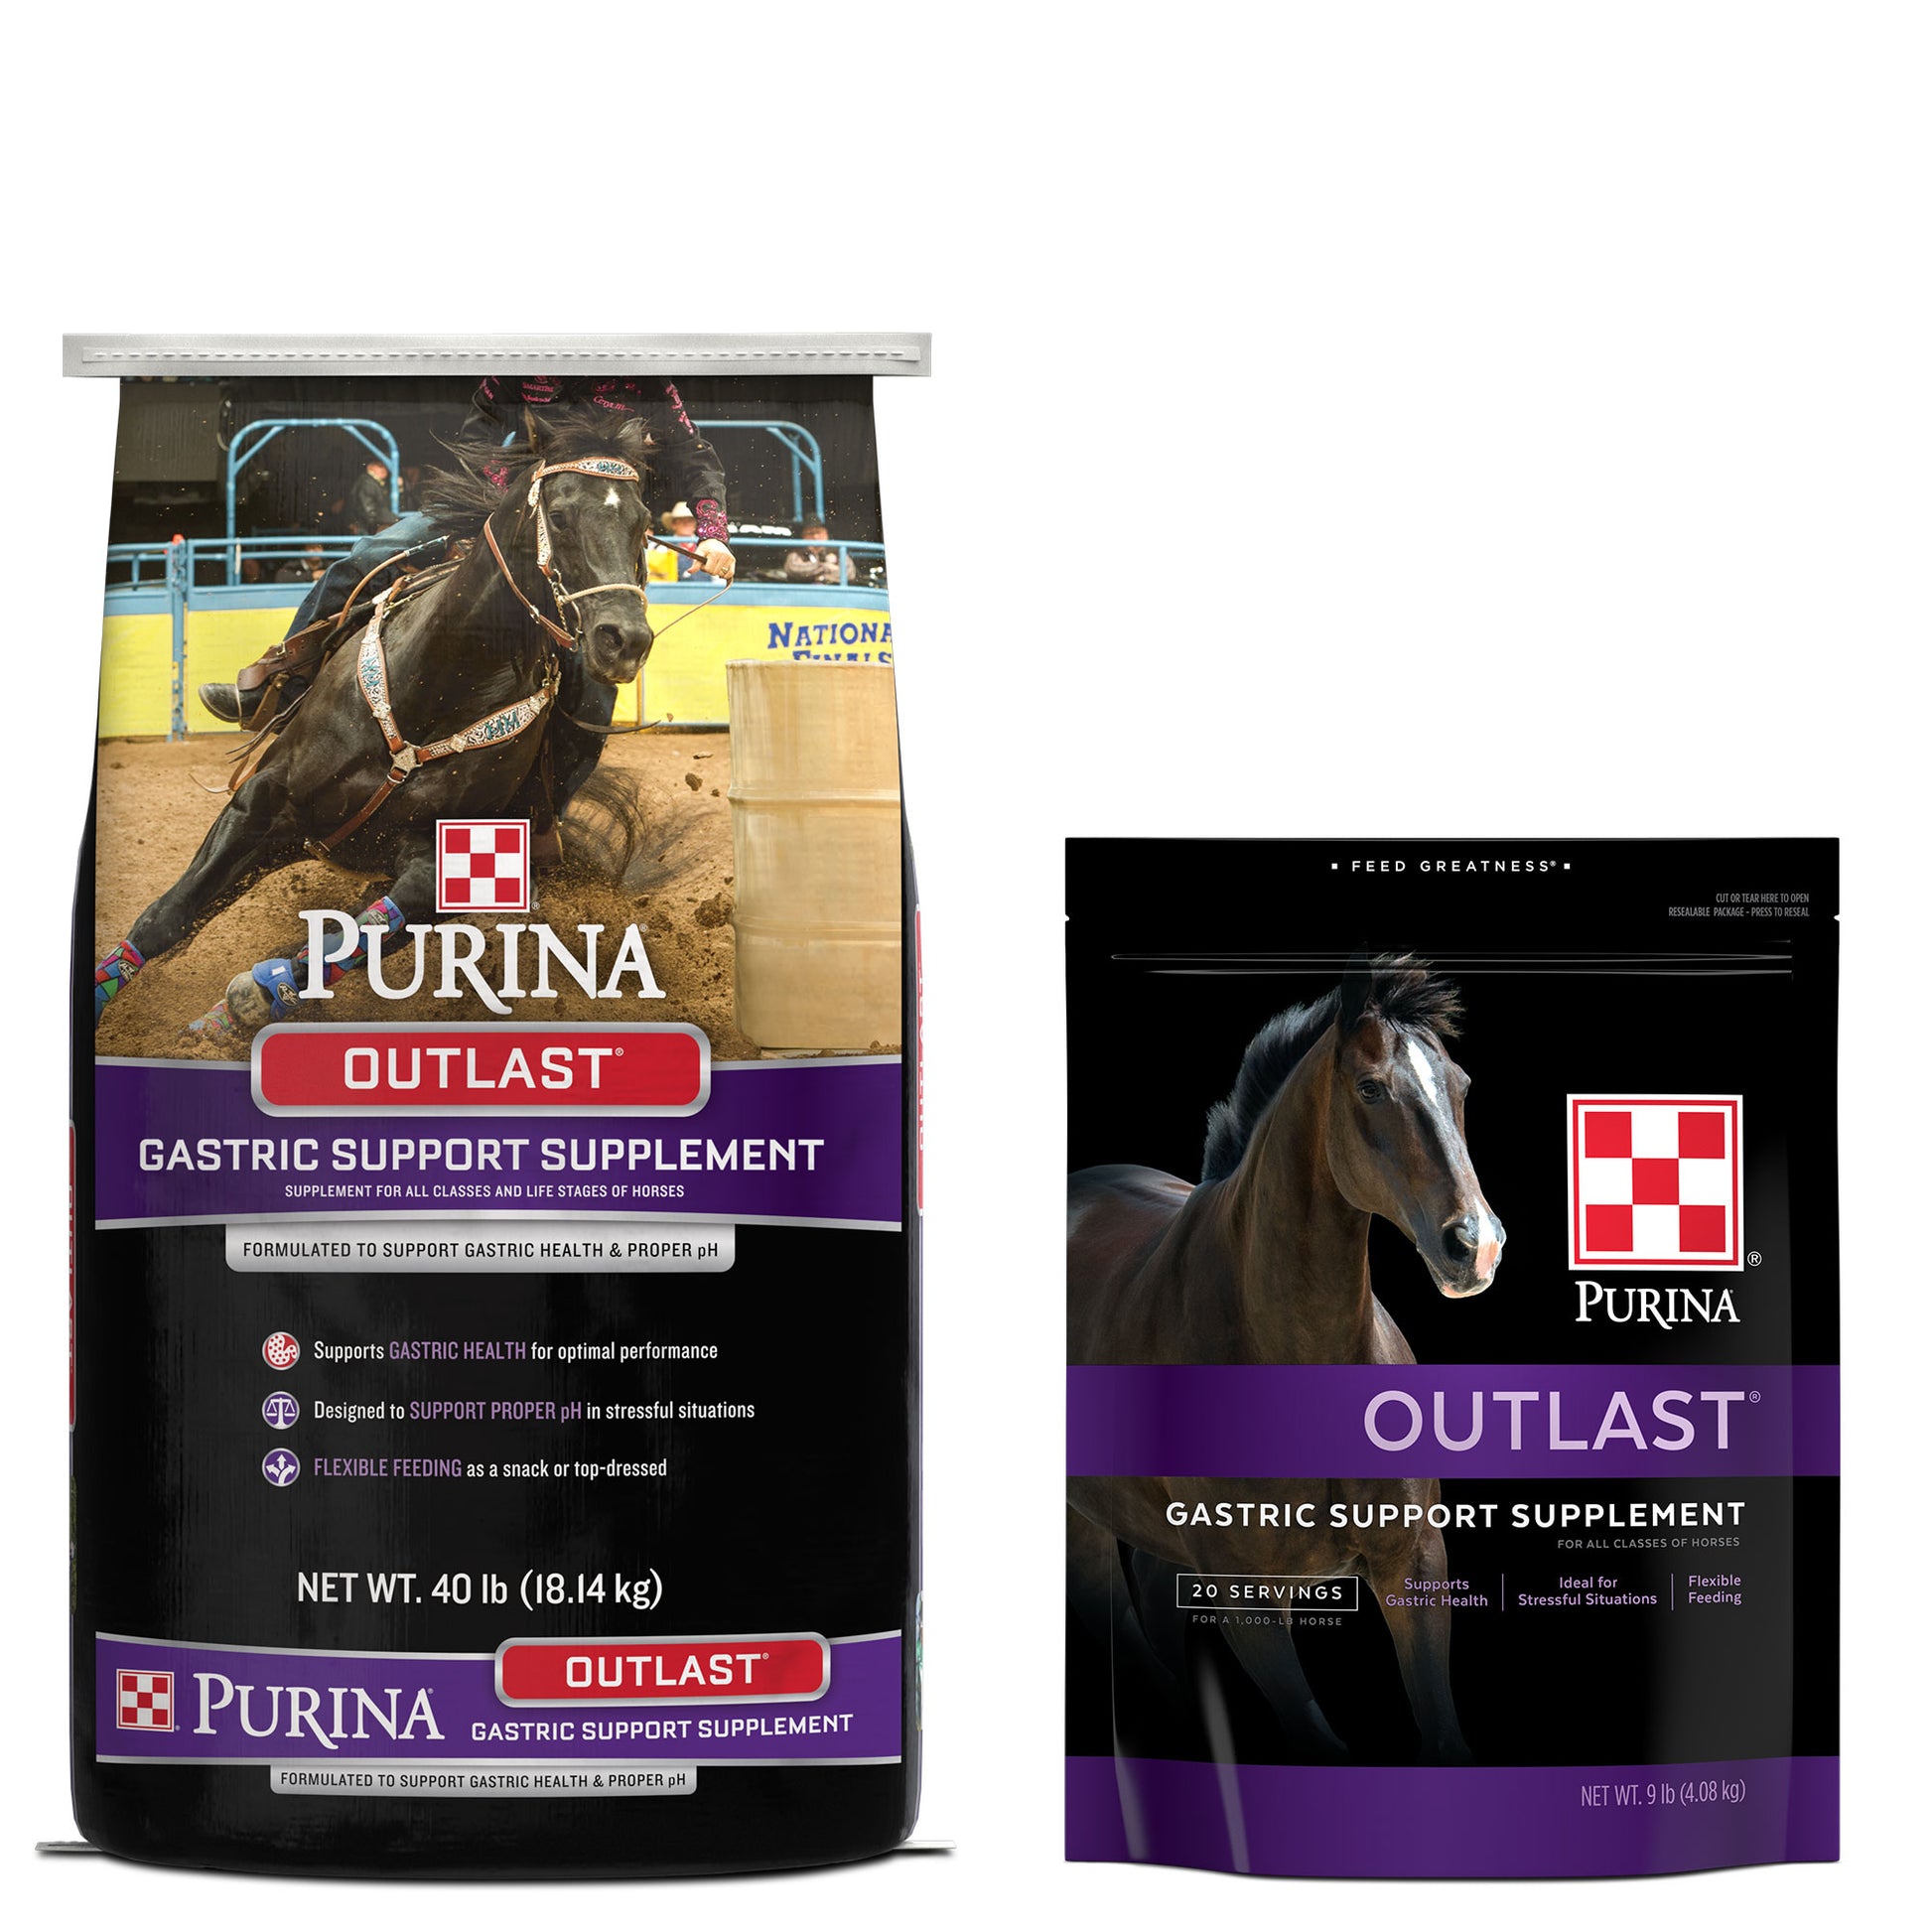 Purina Outlast 50 Pound bag and 9 pound bag grouped together